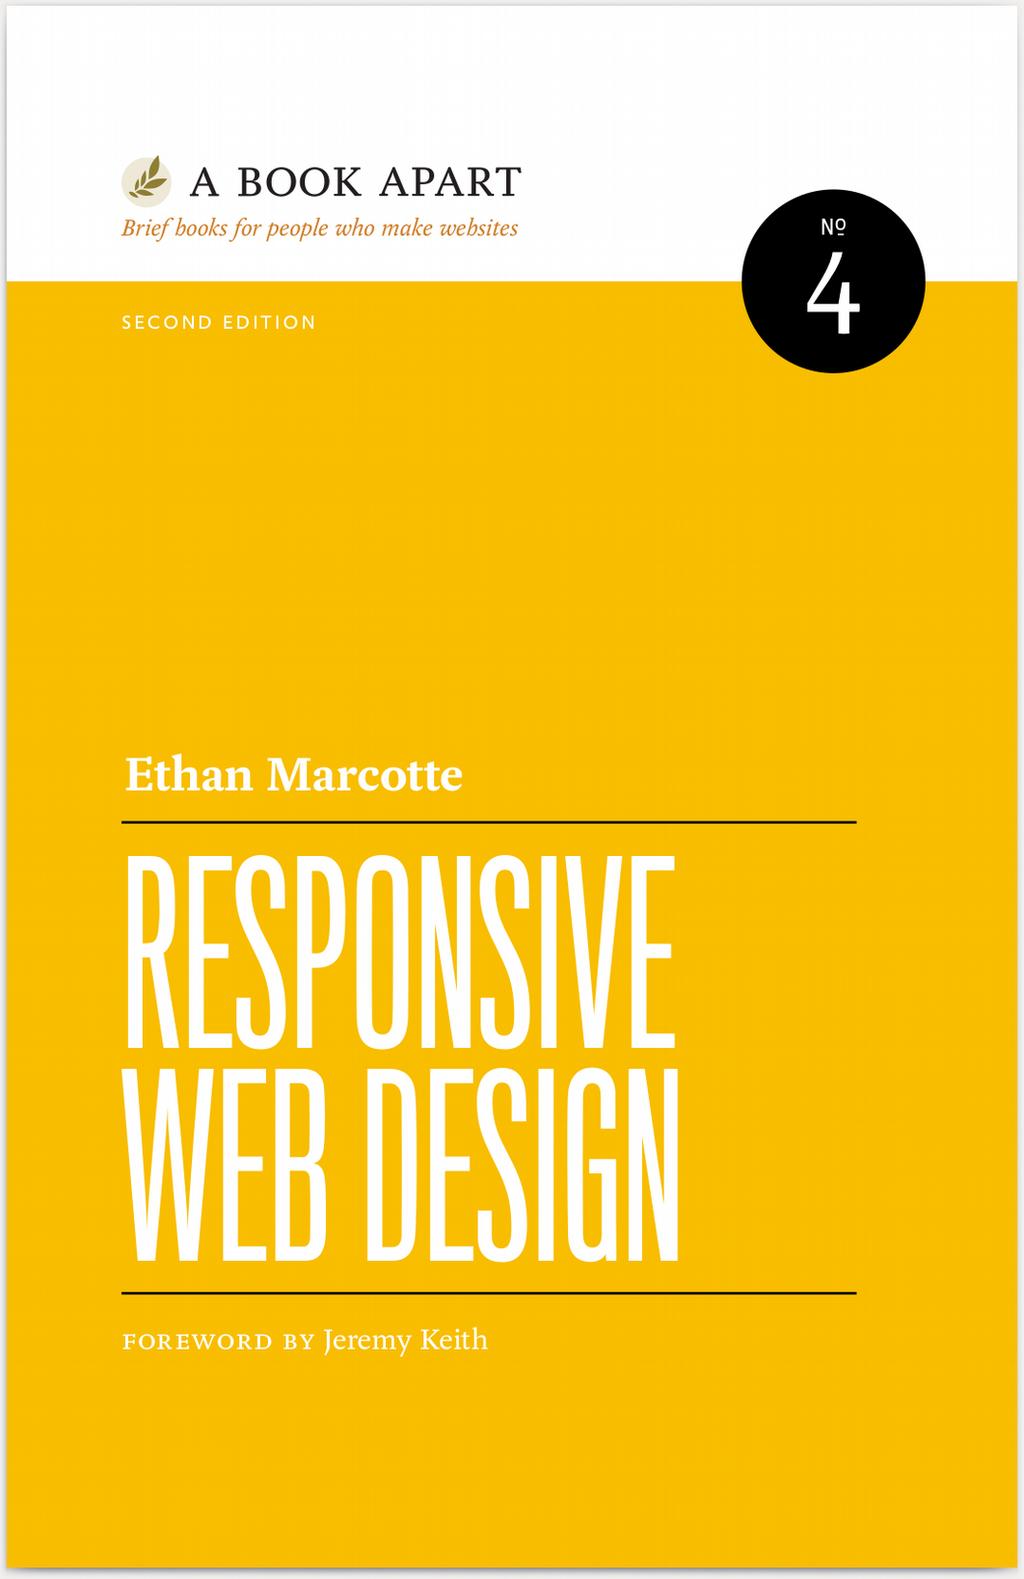 Responsive web design From: Marcotte, Ethan.